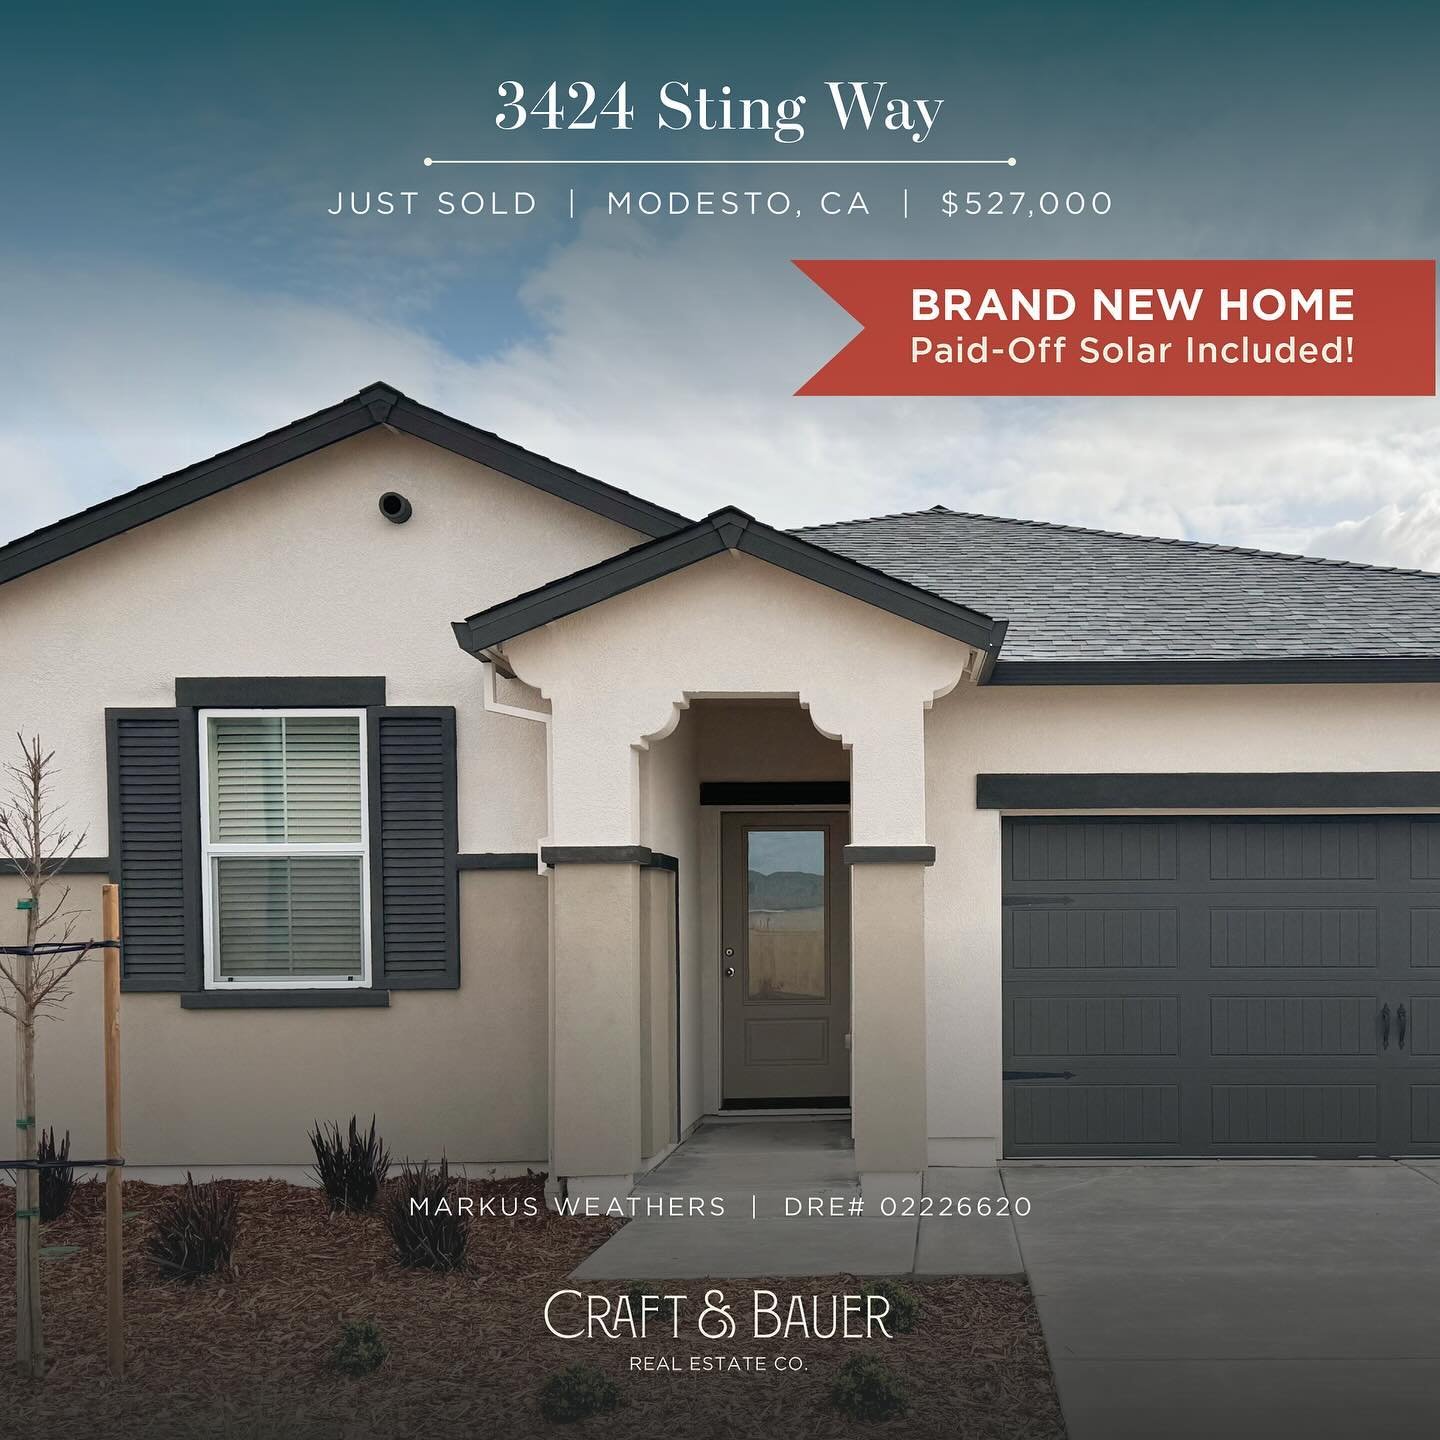 JUST SOLD 👏 Congratulations to the new owners of this beautiful new construction home north of downtown Stockton!⁠
⁠
🏡 3424 Sting Way ⁠
📍 Modesto, CA⁠
💰 $527,000⁠
⁠
The elongated foyer allows for a warm, friendly welcome into the home. The kitche